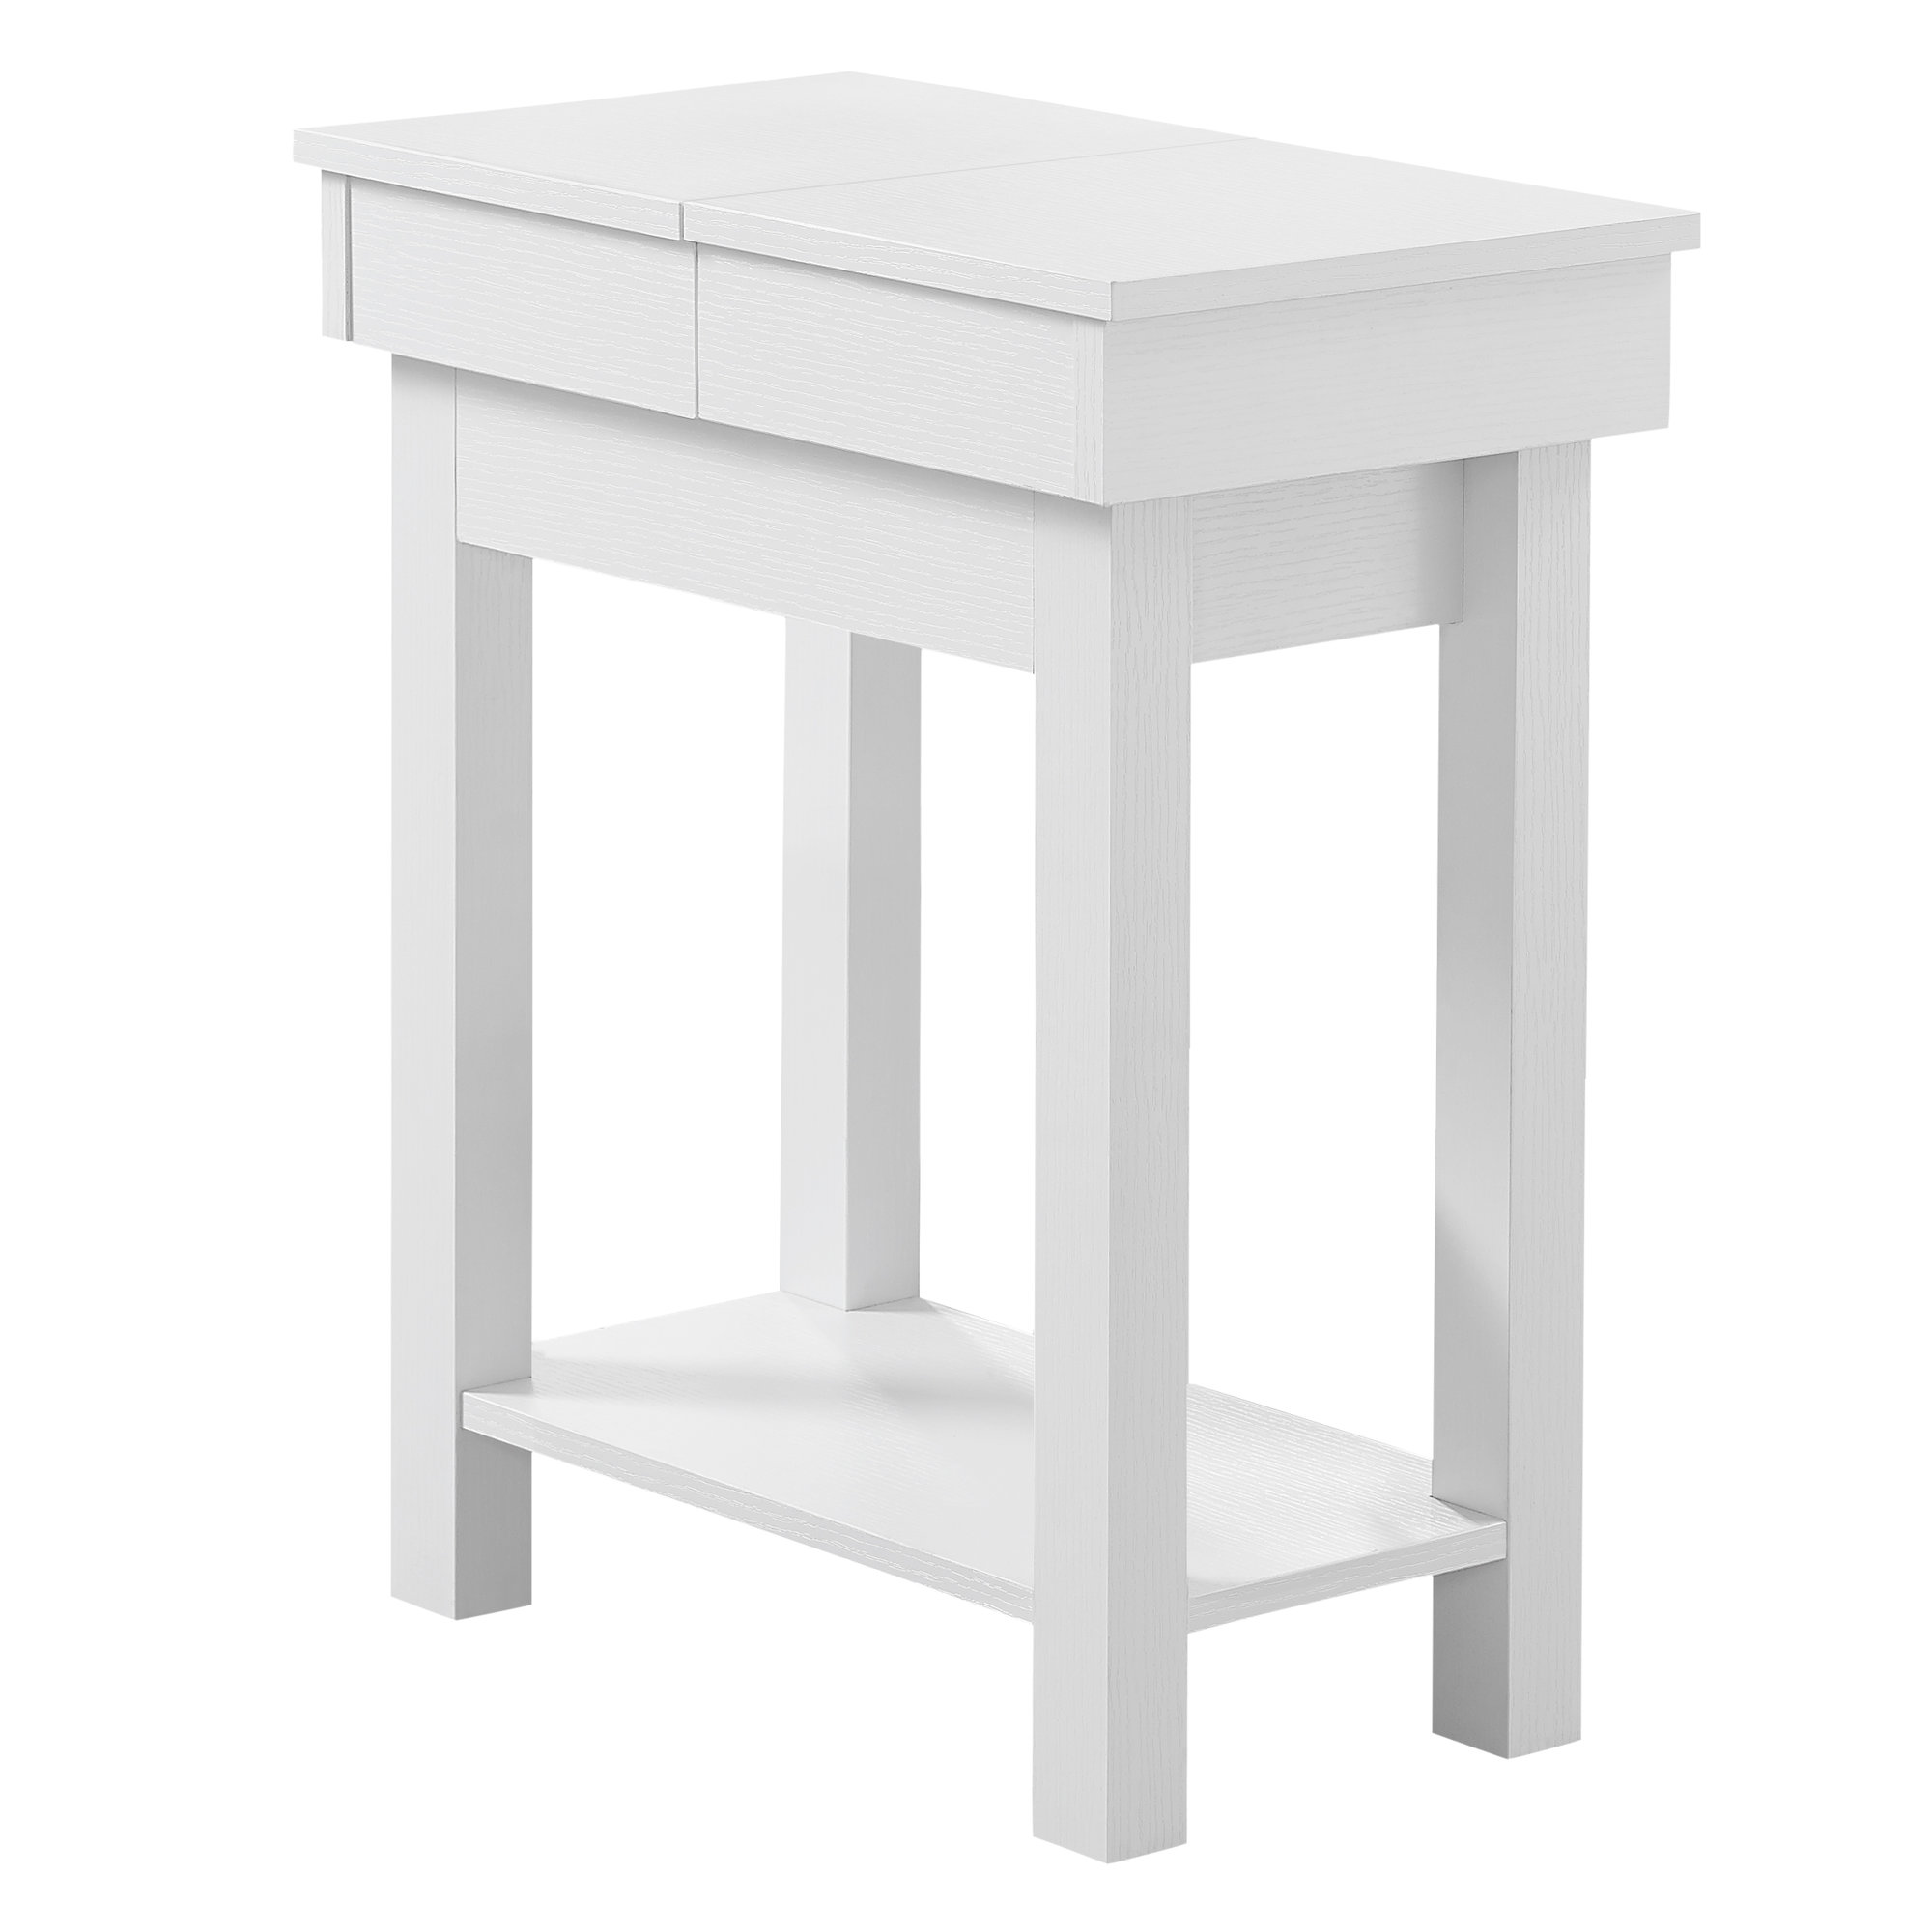 20" x 11.75" x 24" White Finish Hollow Core Storage Accent Table